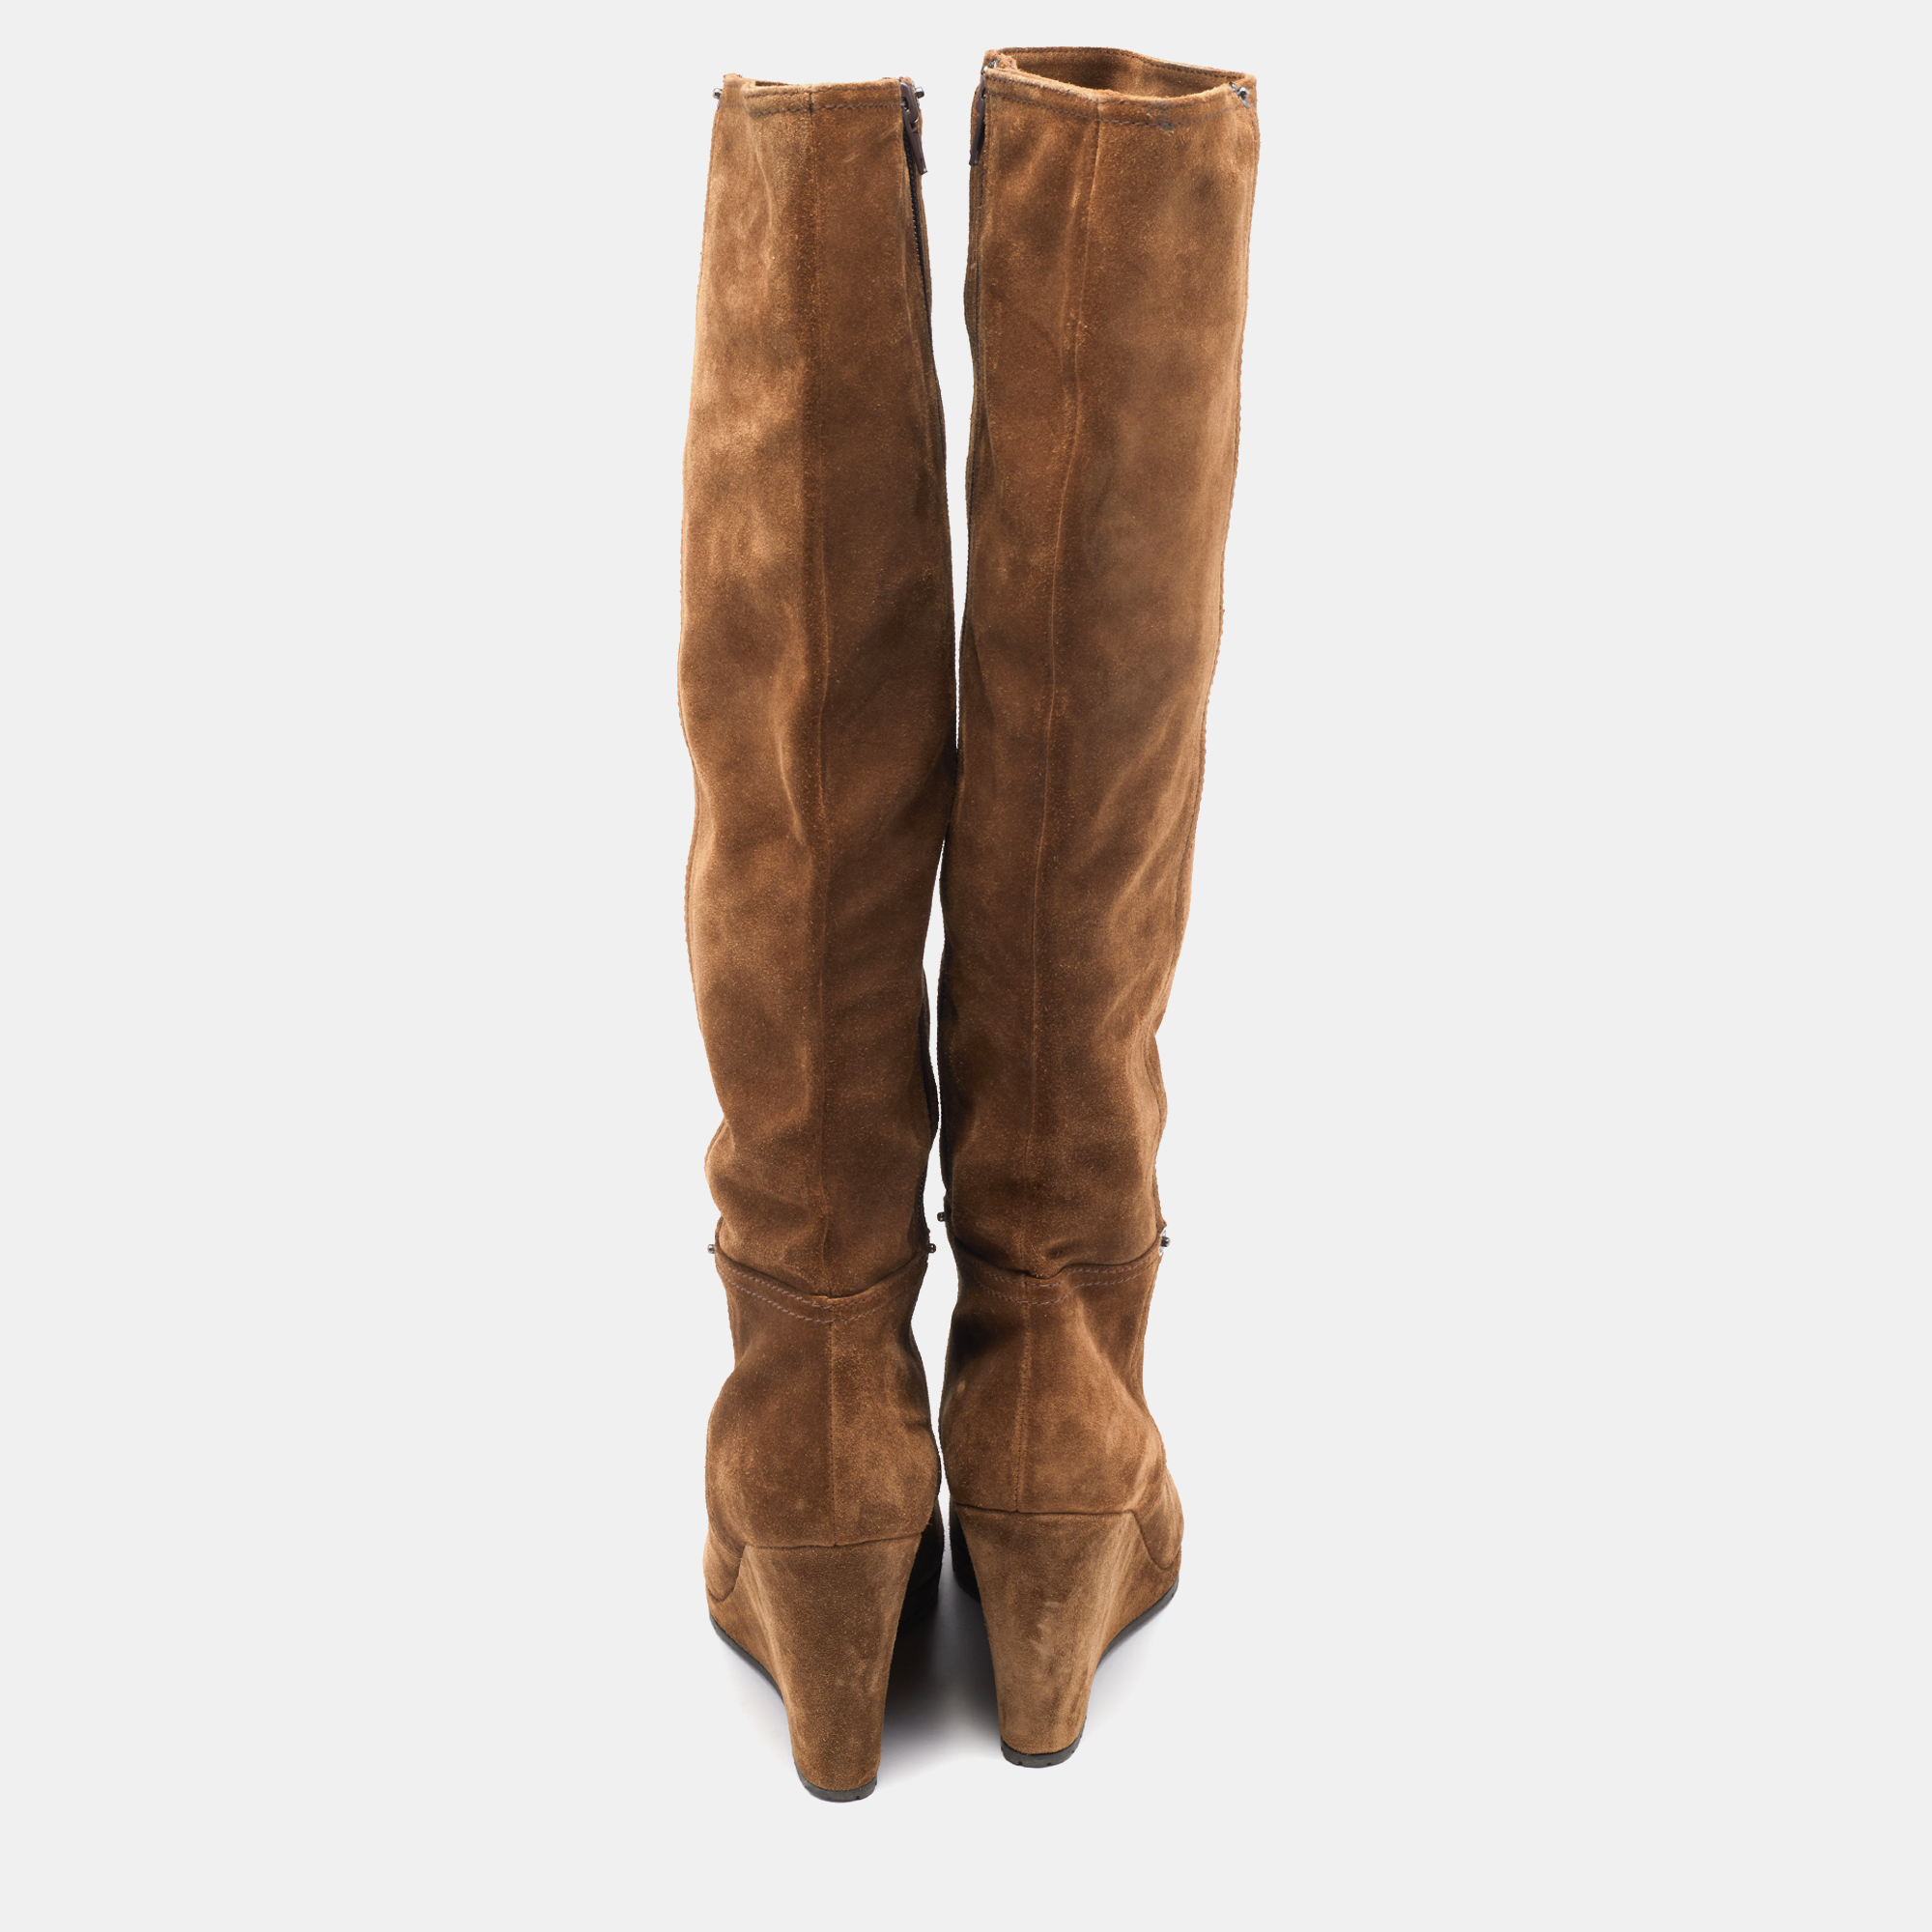 Prada Brown Suede  Knee Length Boots Size 39.5